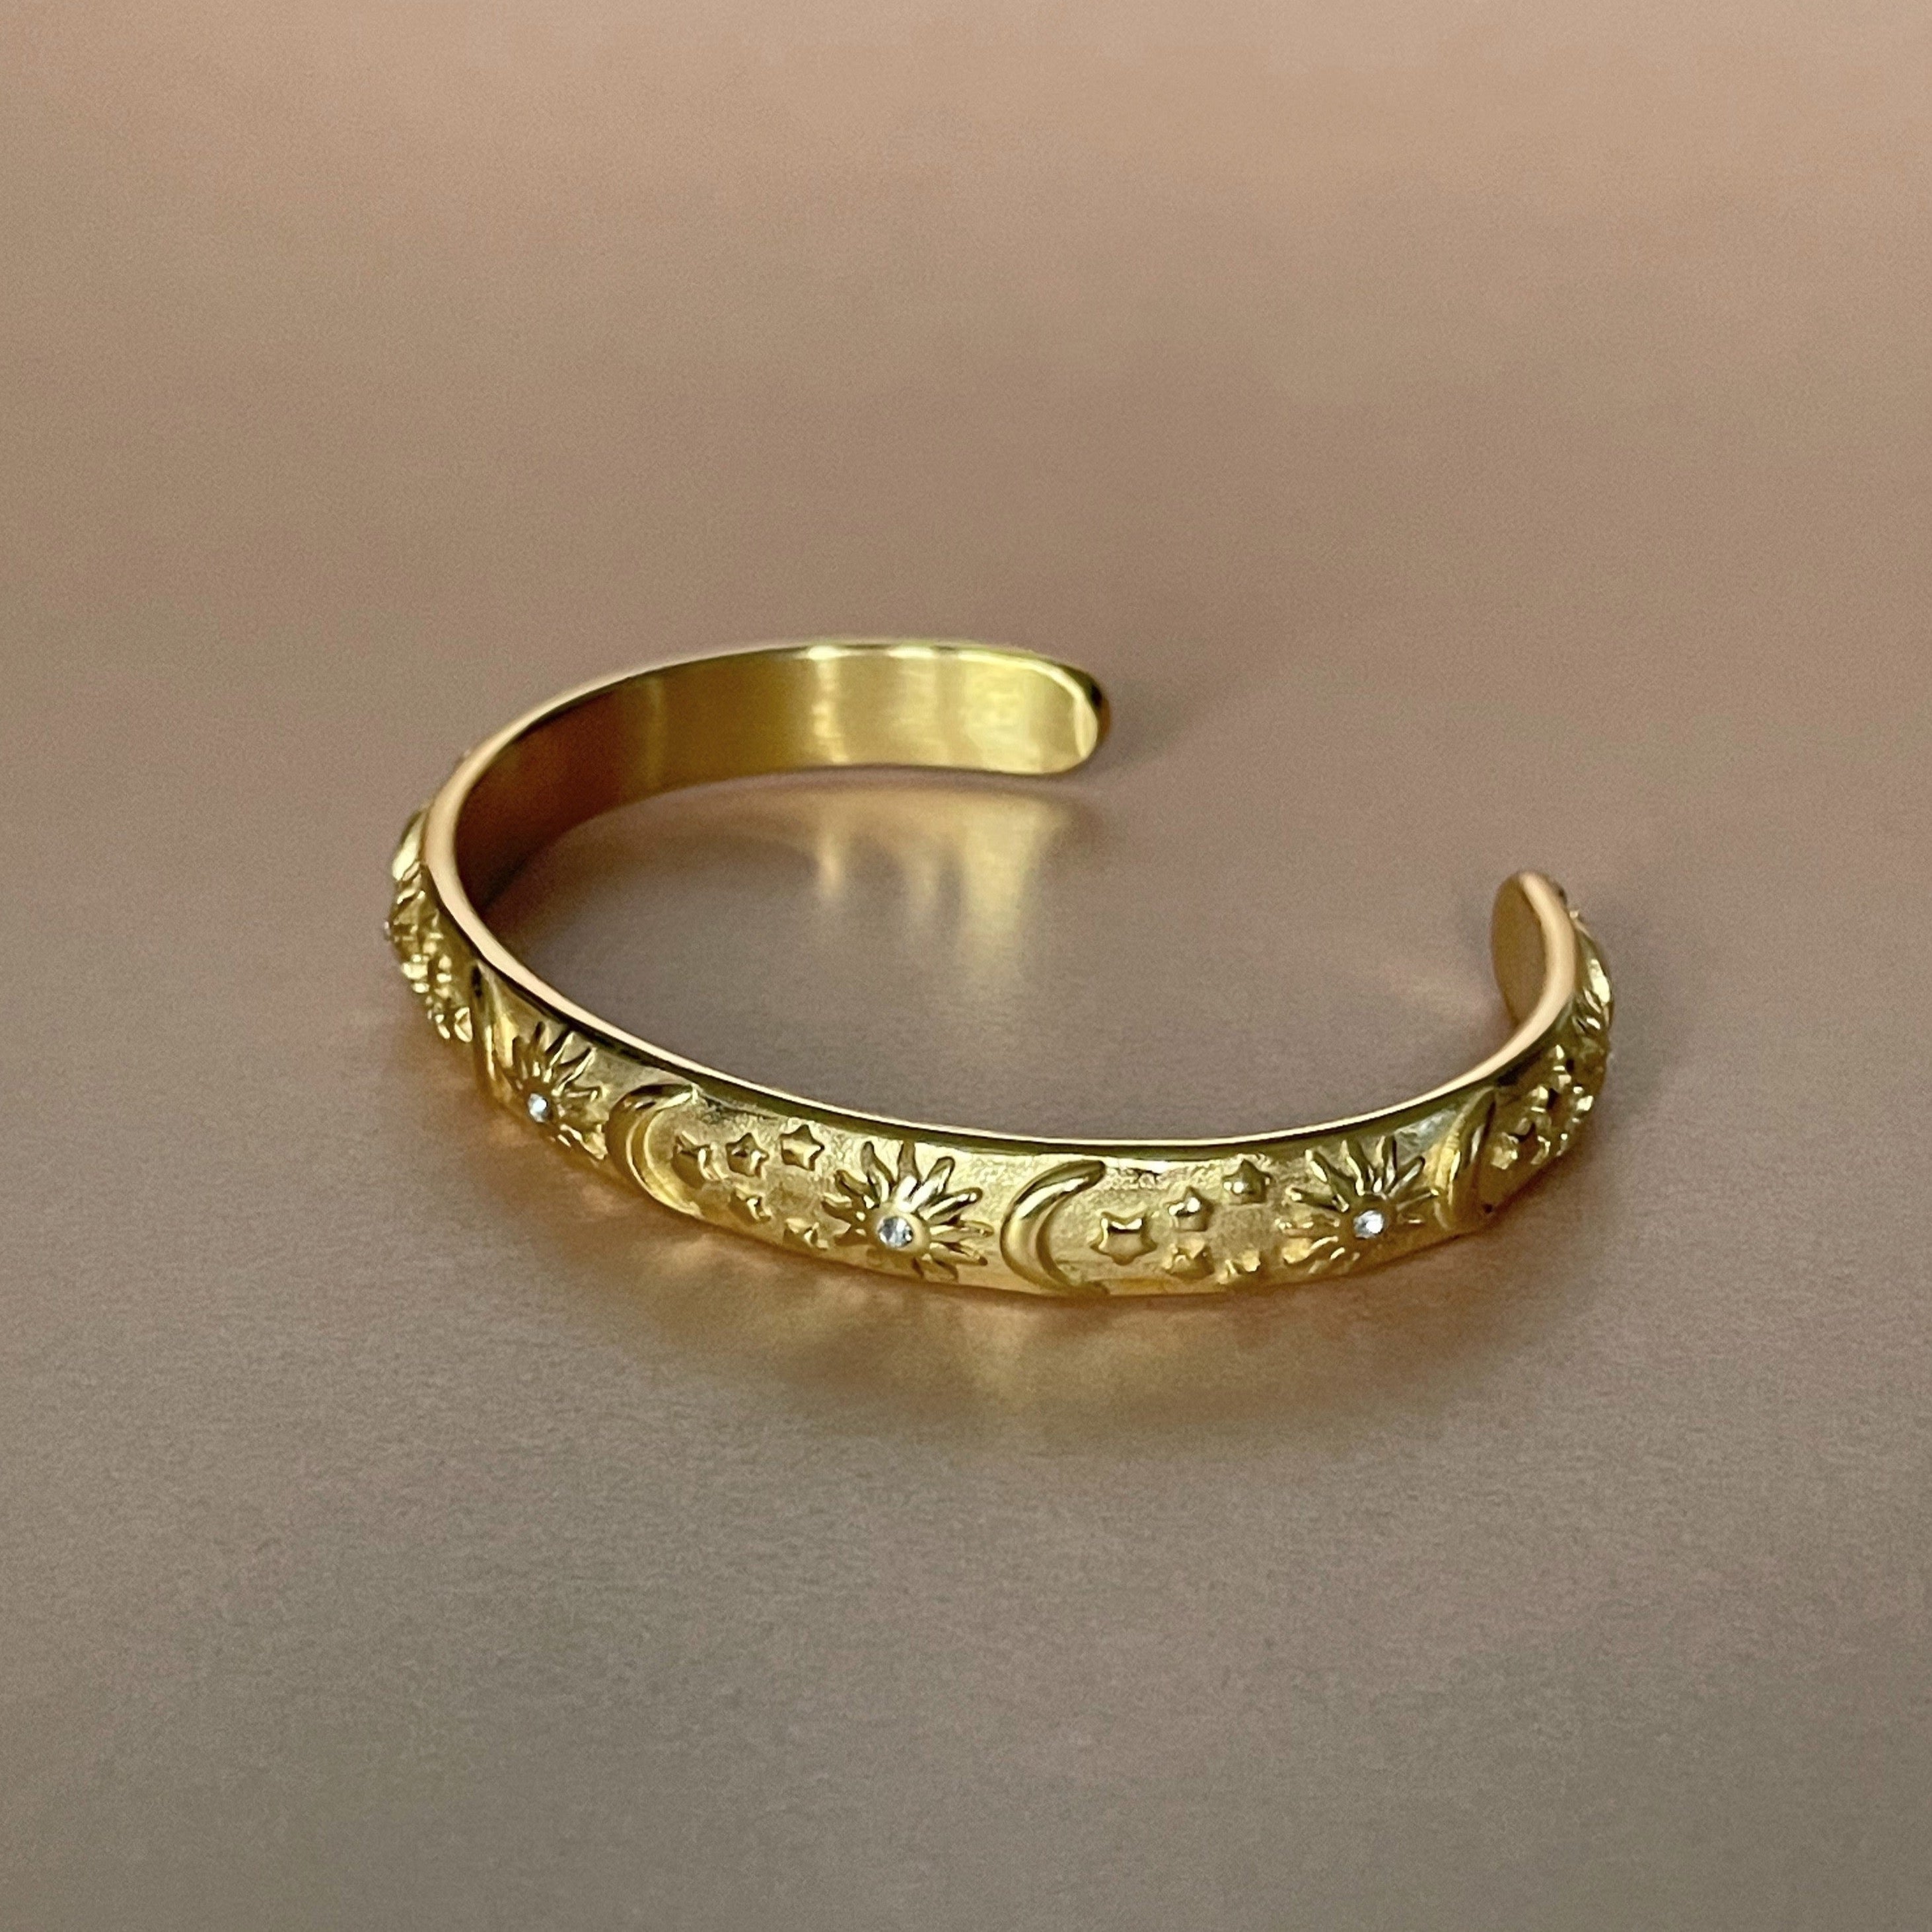 Helia Luxe 18k Gold Plated Celestial Bangle